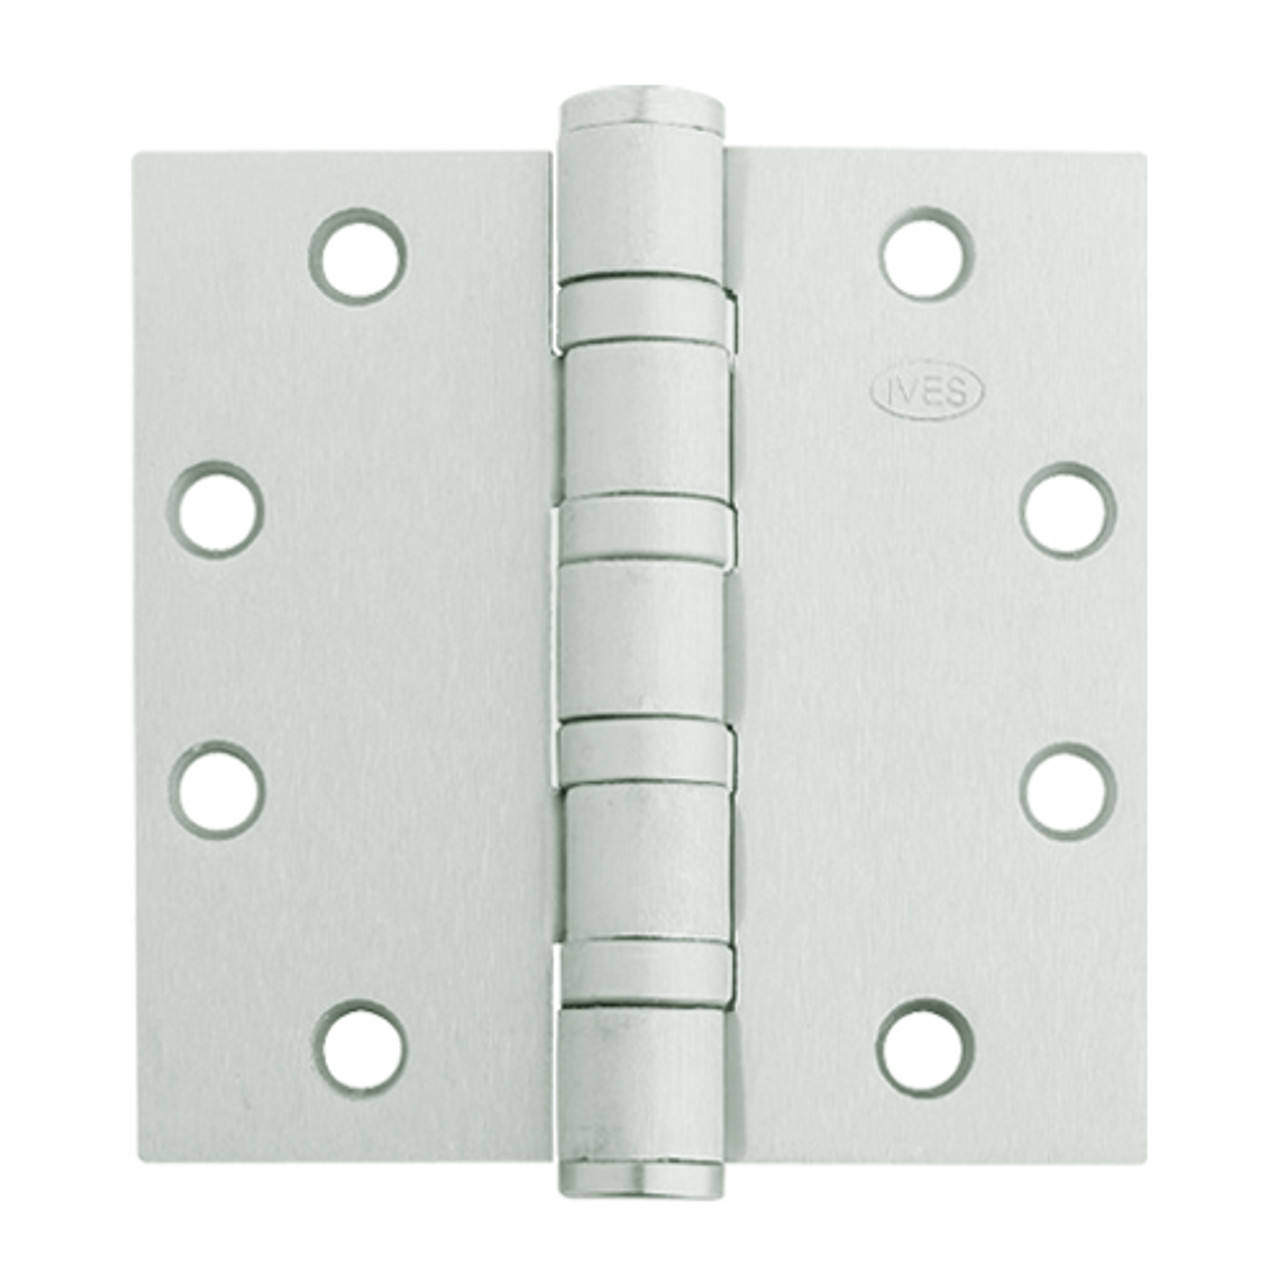 5BB1HW-5x5-646-TW4 IVES 5 Knuckle Ball Bearing Full Mortise Hinge with Electric Thru-Wire in Satin Nickel Plated